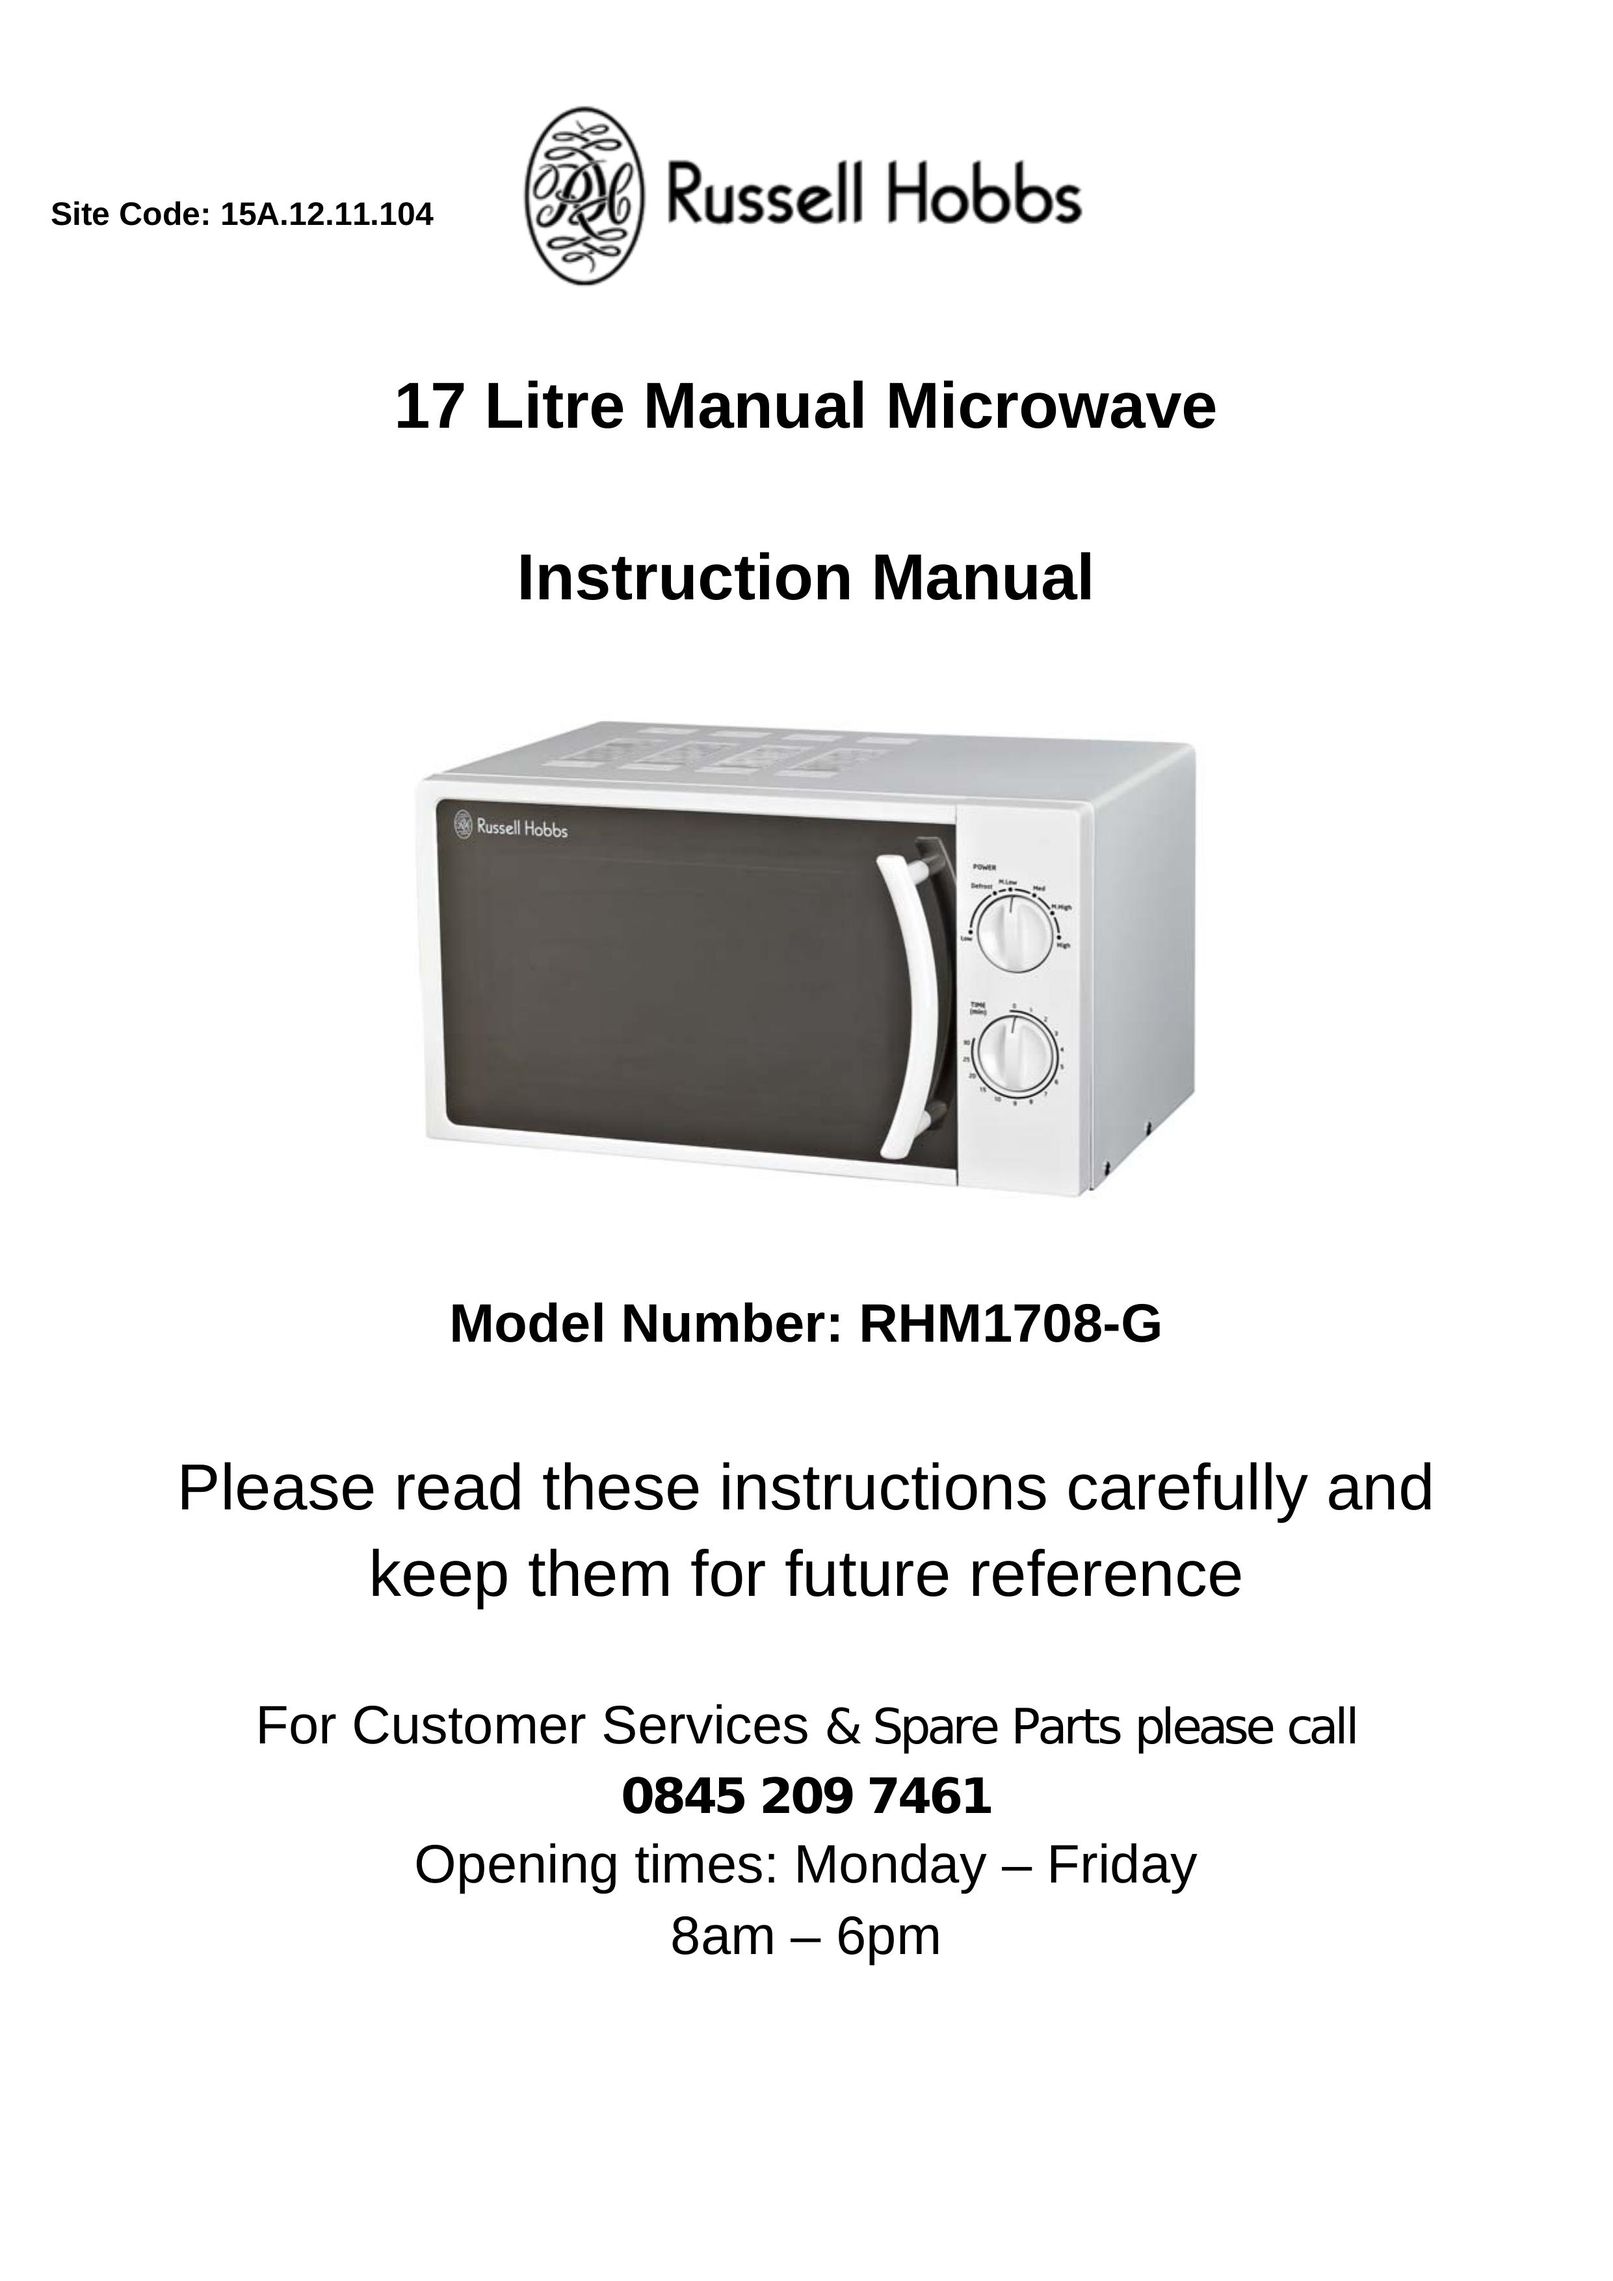 Russell Hobbs RHM1708-G Microwave Oven User Manual